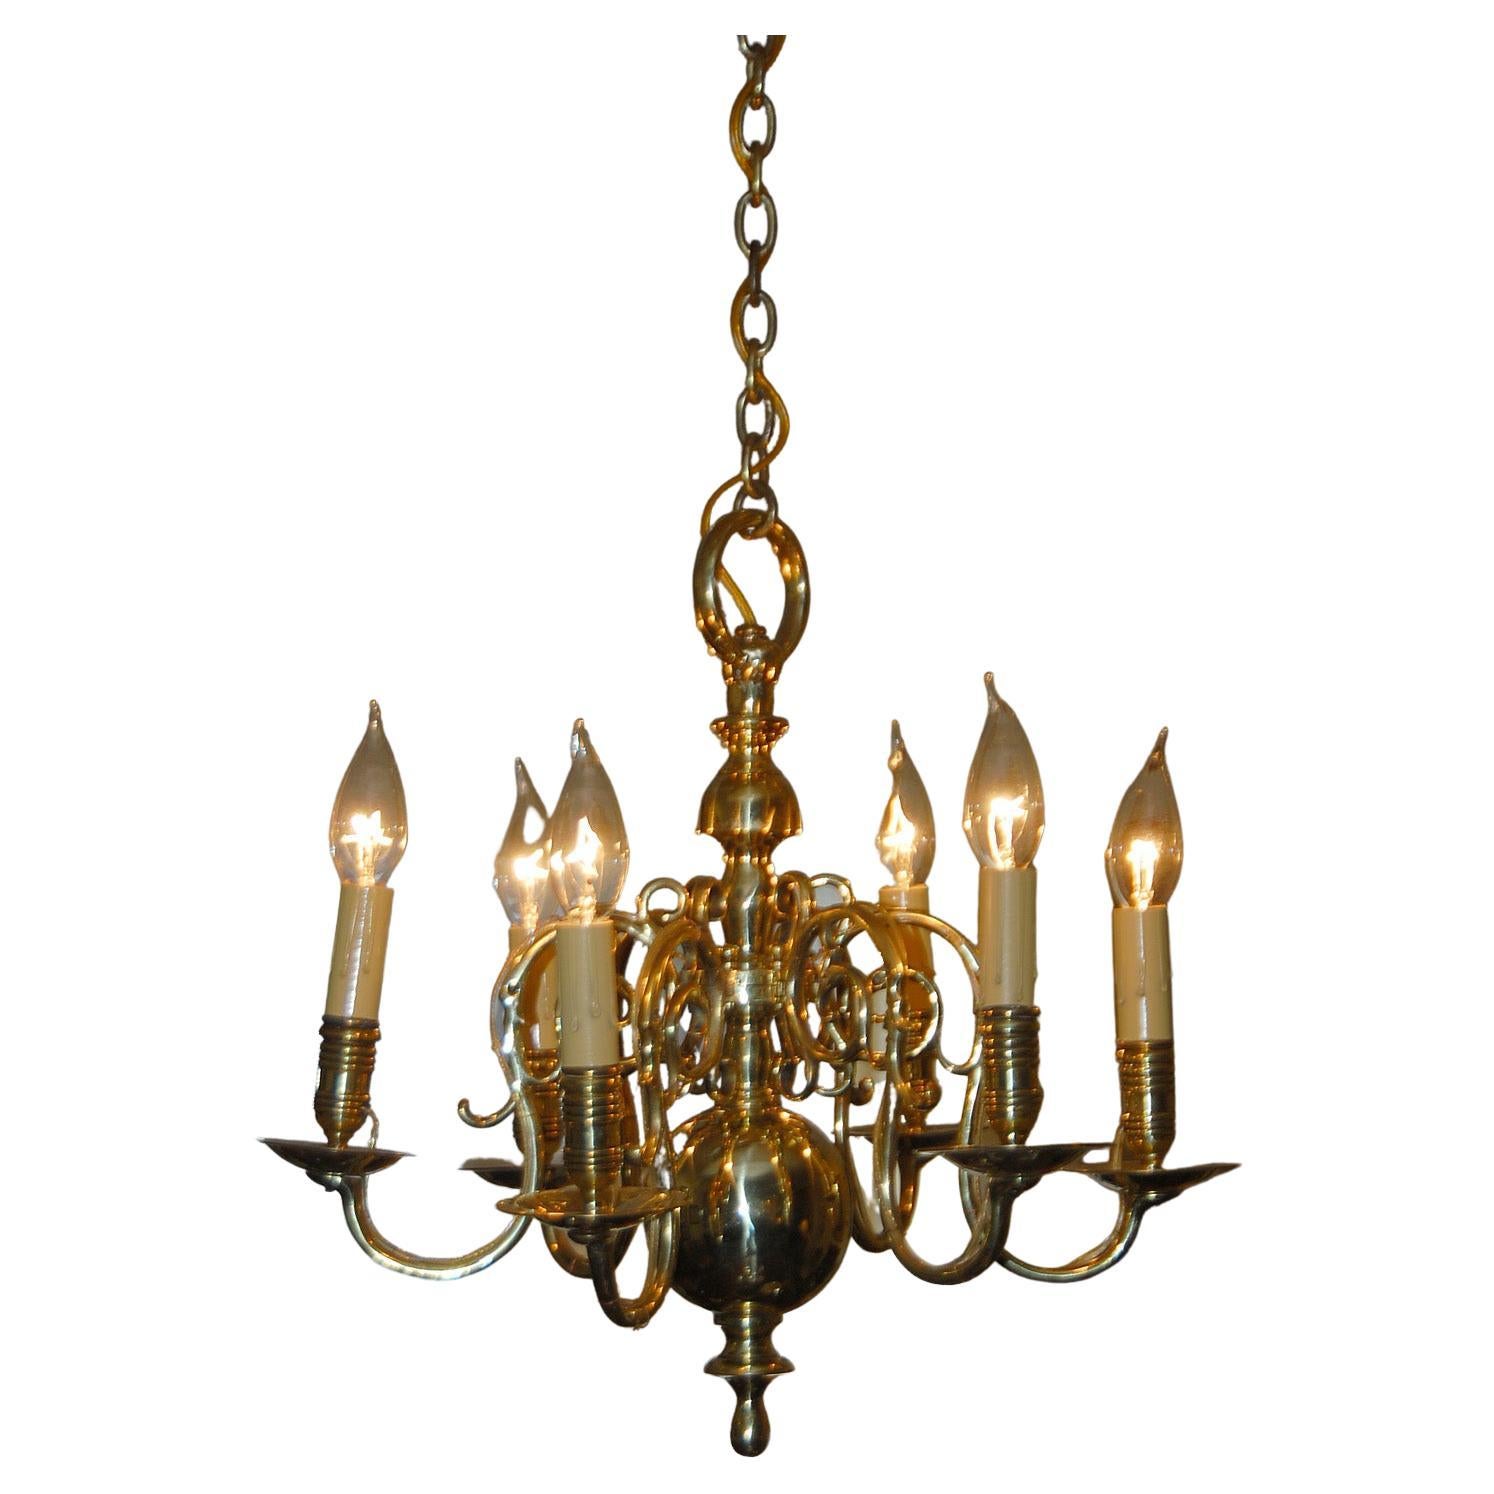 English Georgian Chippendale Period Brass Six Arm Chandelier For Sale